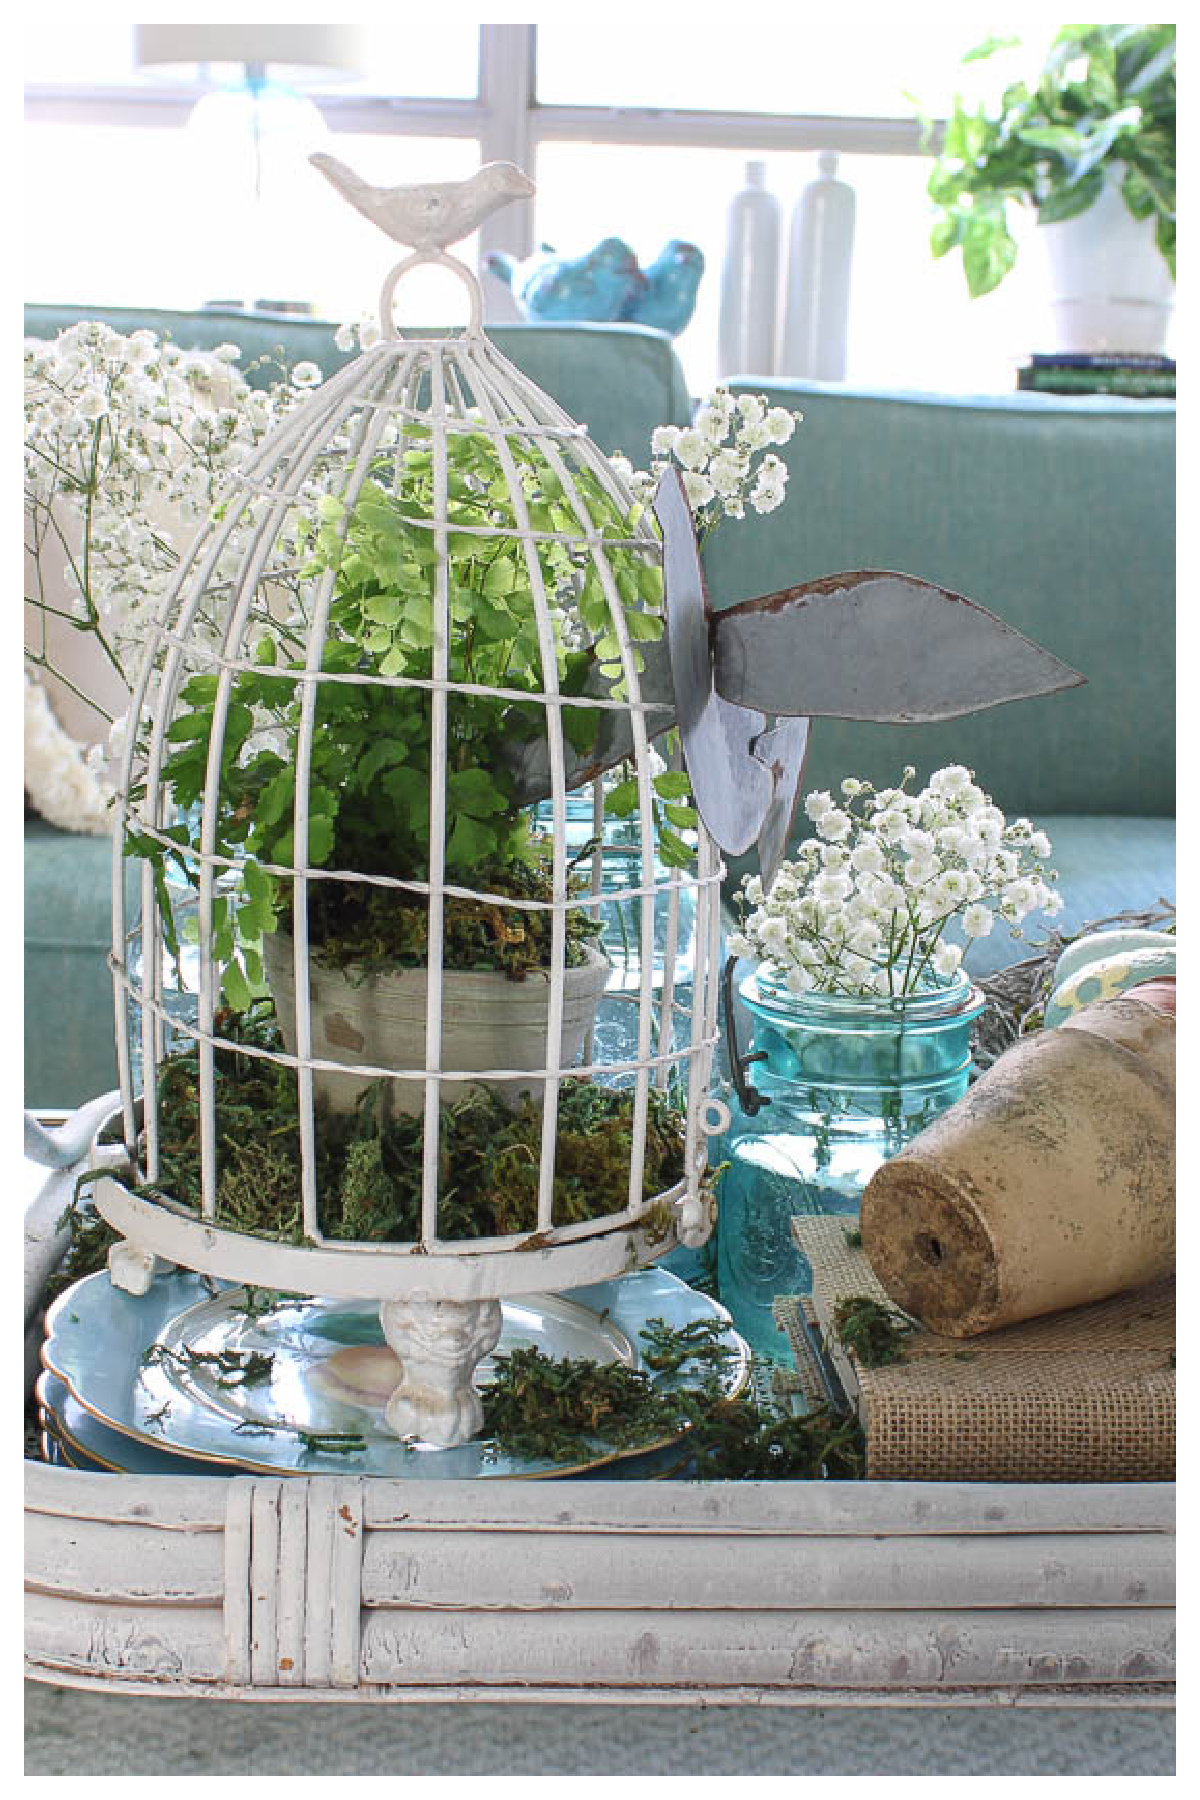 12 Ways to decorate a vintage birdcage for winter.  Vintage bird cage,  Vintage bird cage decor, Bird cage decor